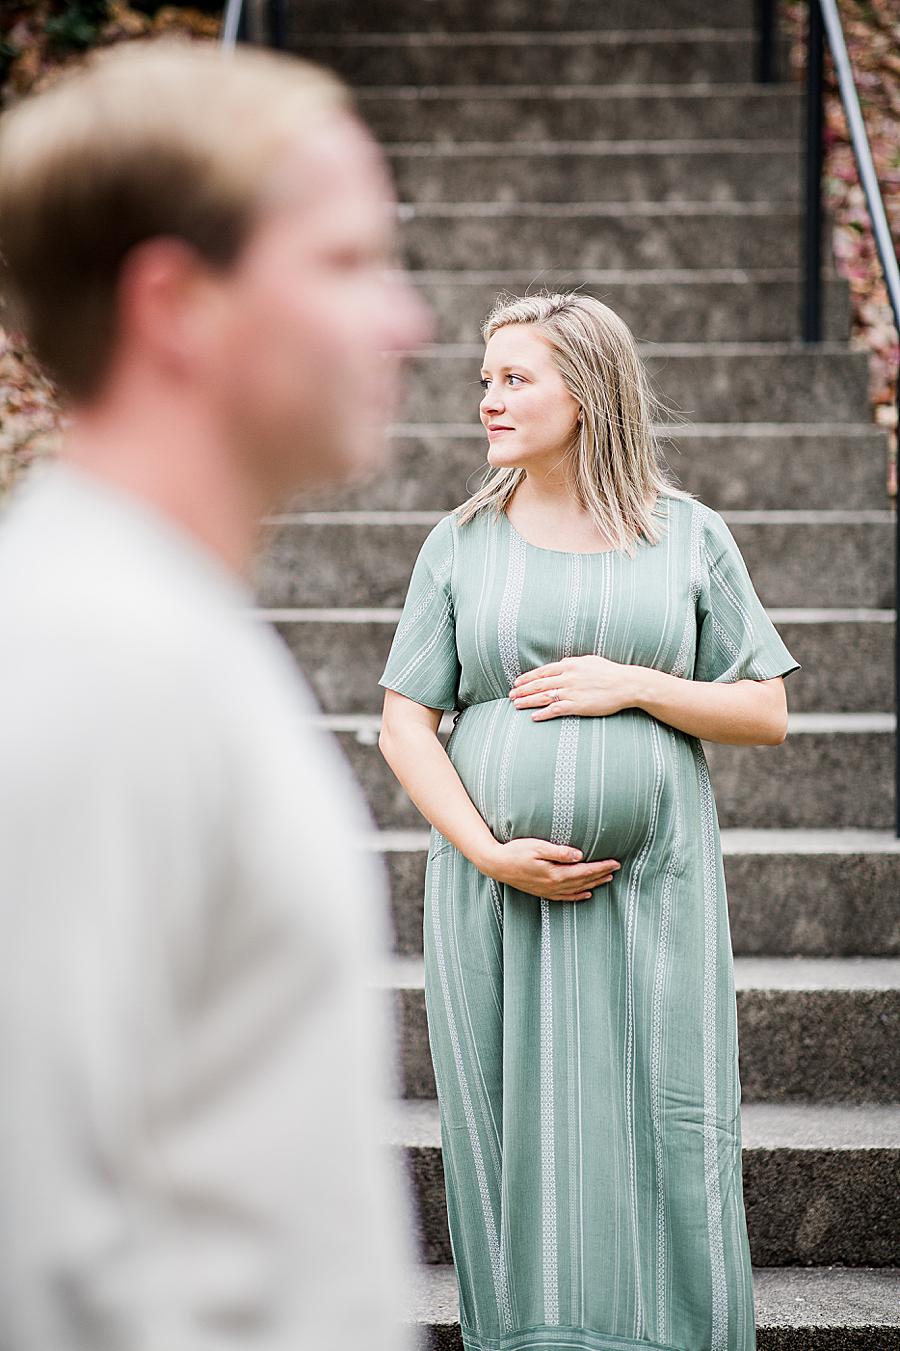 Focused on mom at this Downtown Knoxville Maternity by Knoxville Wedding Photographer, Amanda May Photos.